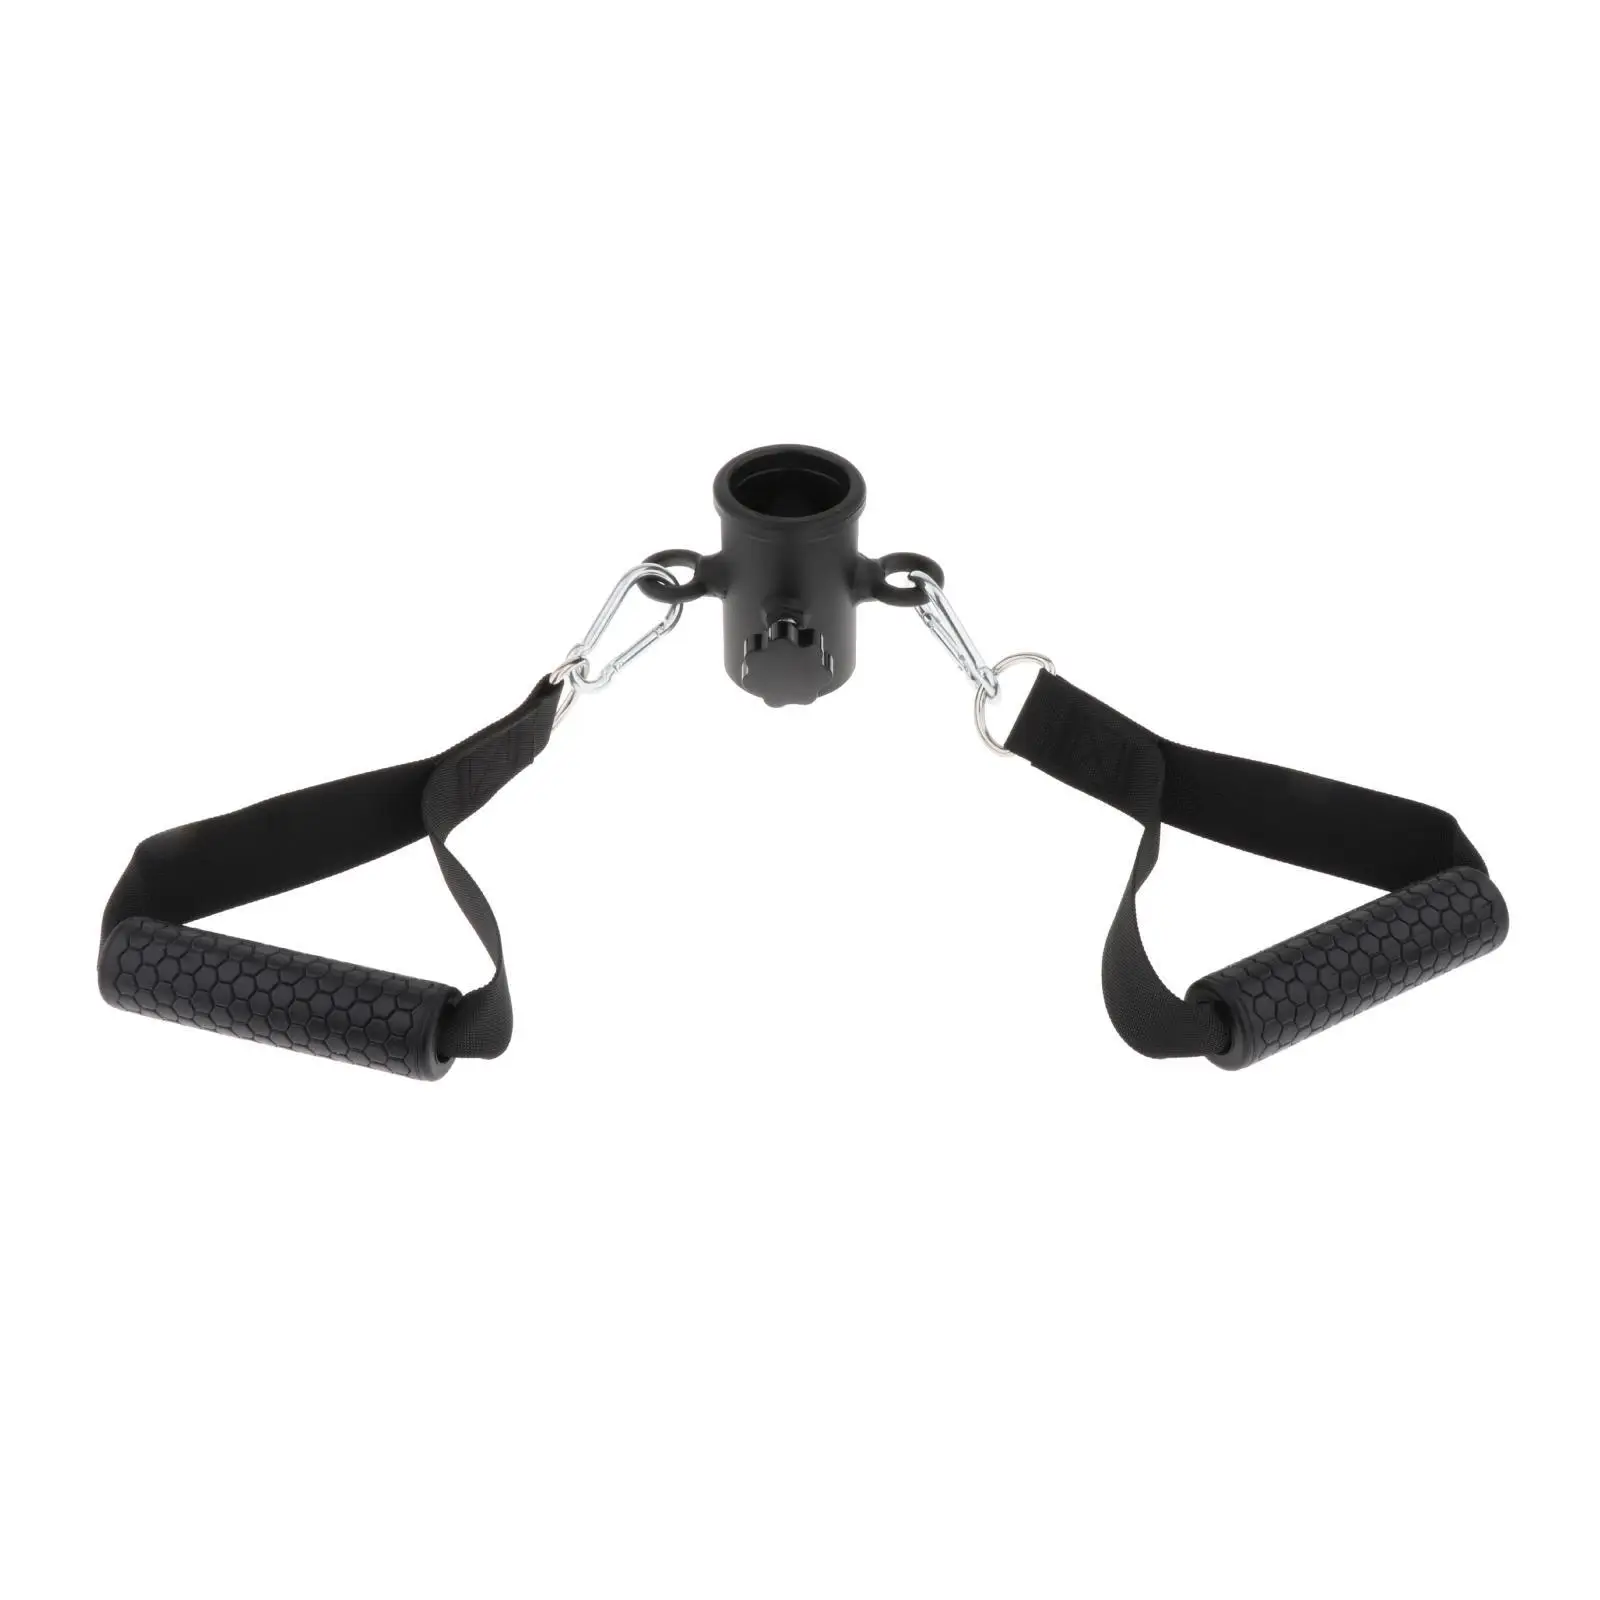 Landmine Handle Attachment Exercise Machine Parts Landmine Double Handle Grips for 50mm Bars for Weight Training Split Squats